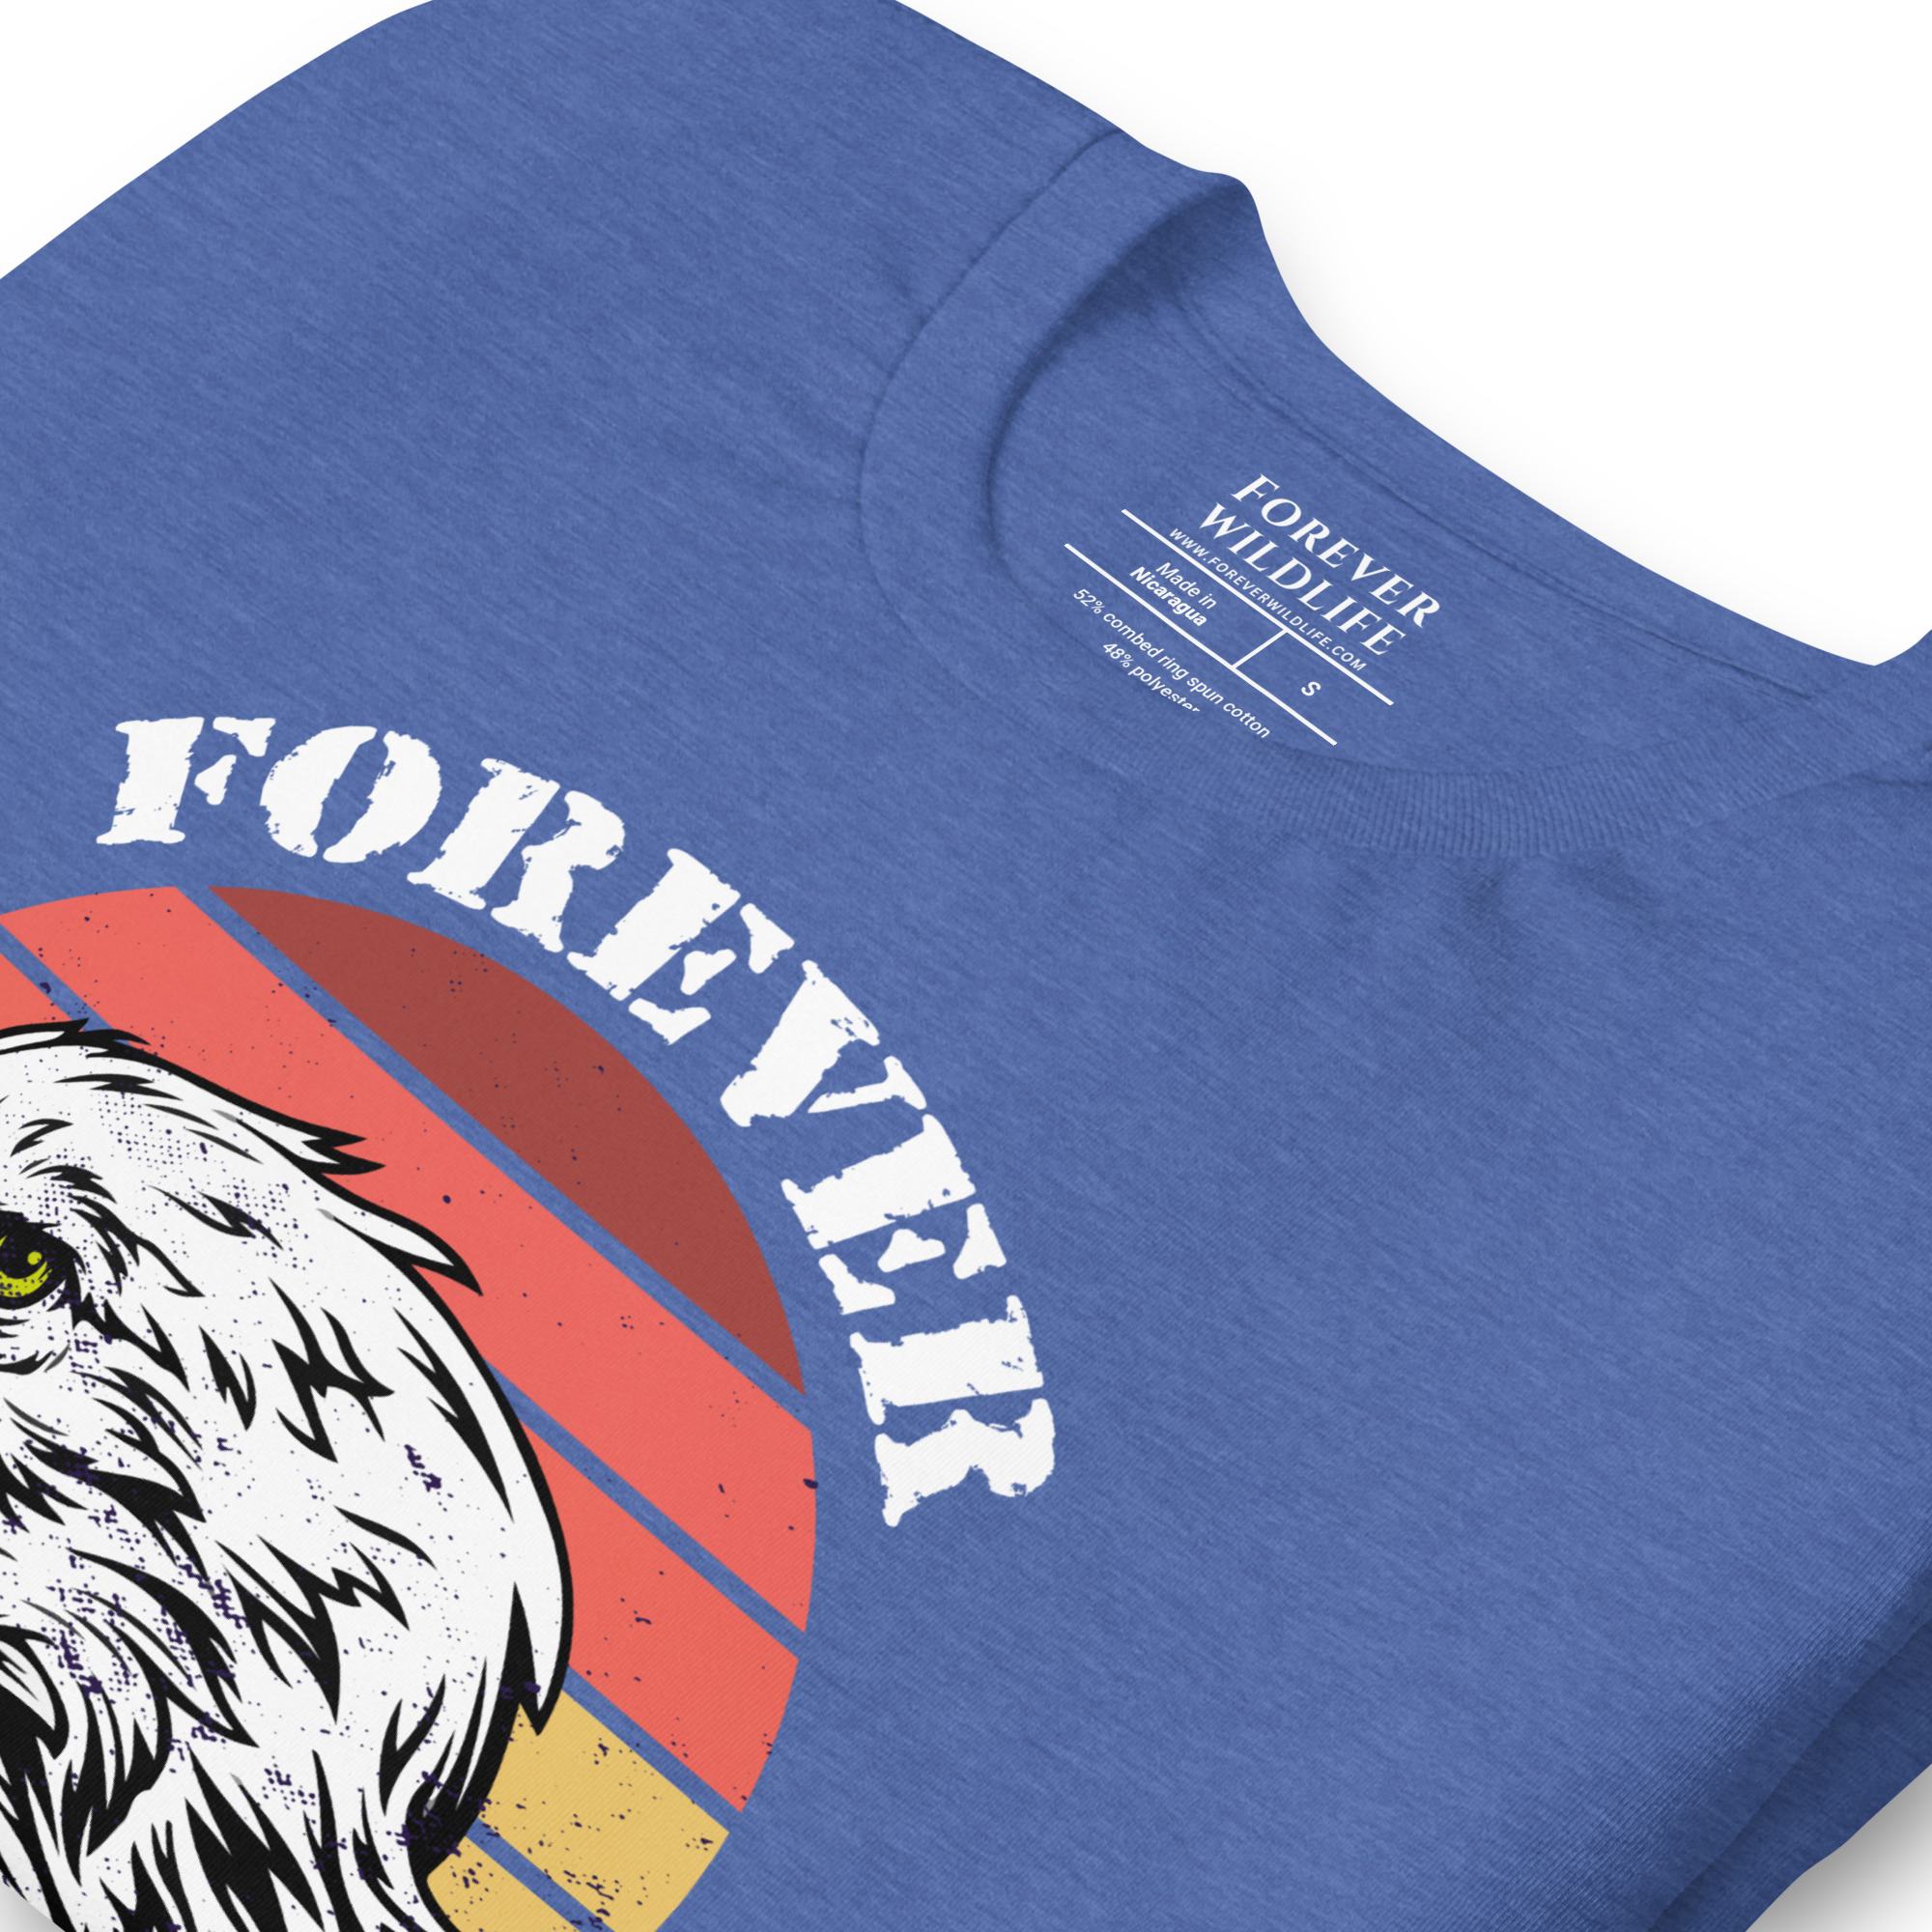 Eagle T-Shirt, Heather Tee in True Royal – Premium Wildlife T-Shirt Design, Eagle Shirts and Wildlife Clothing from Forever Wildlife